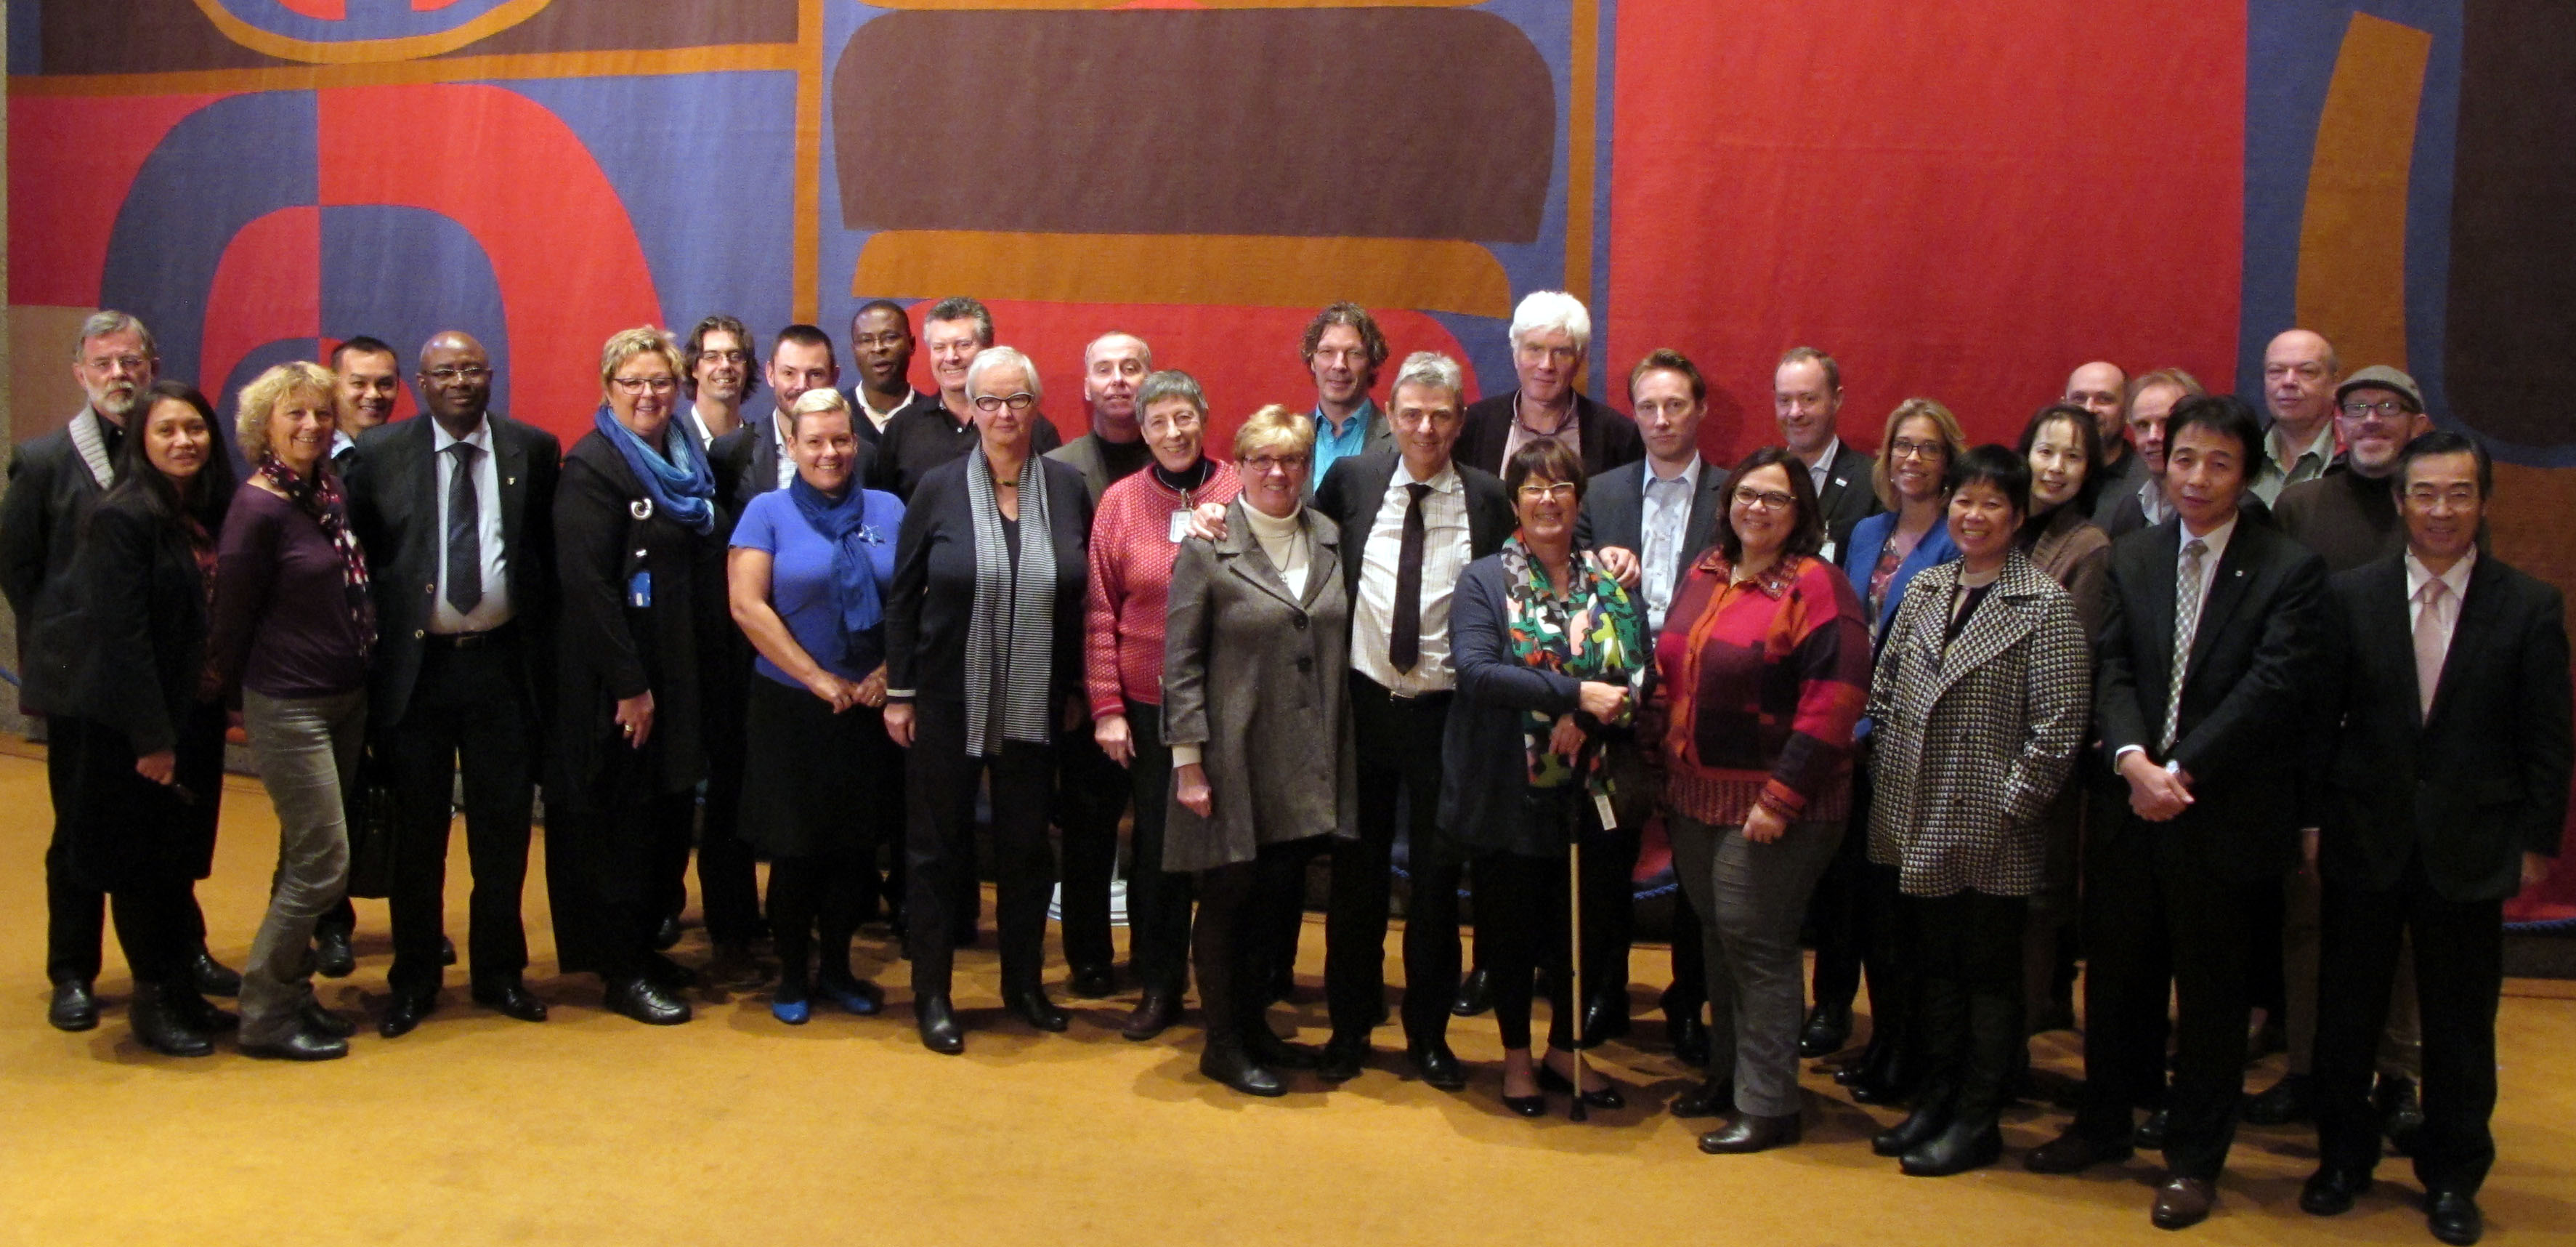 PSI Steering Committee and staff, November 2013